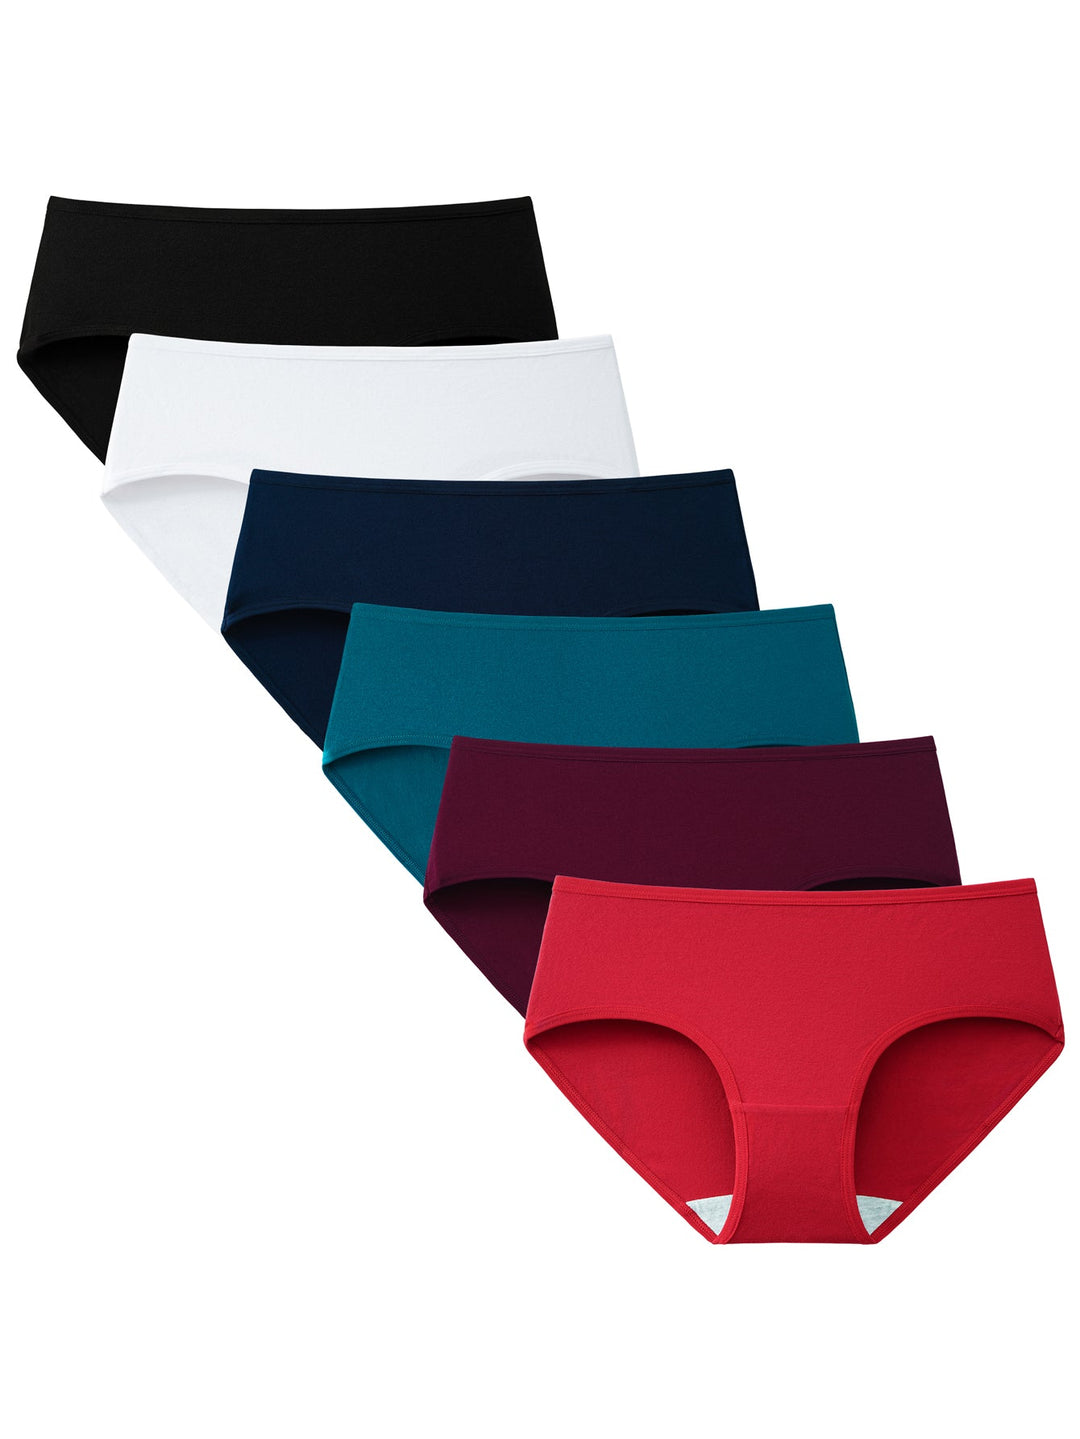  INNERSY Womens Underwear Cotton Hipster Panties Regular &  Plus Size 6-Pack